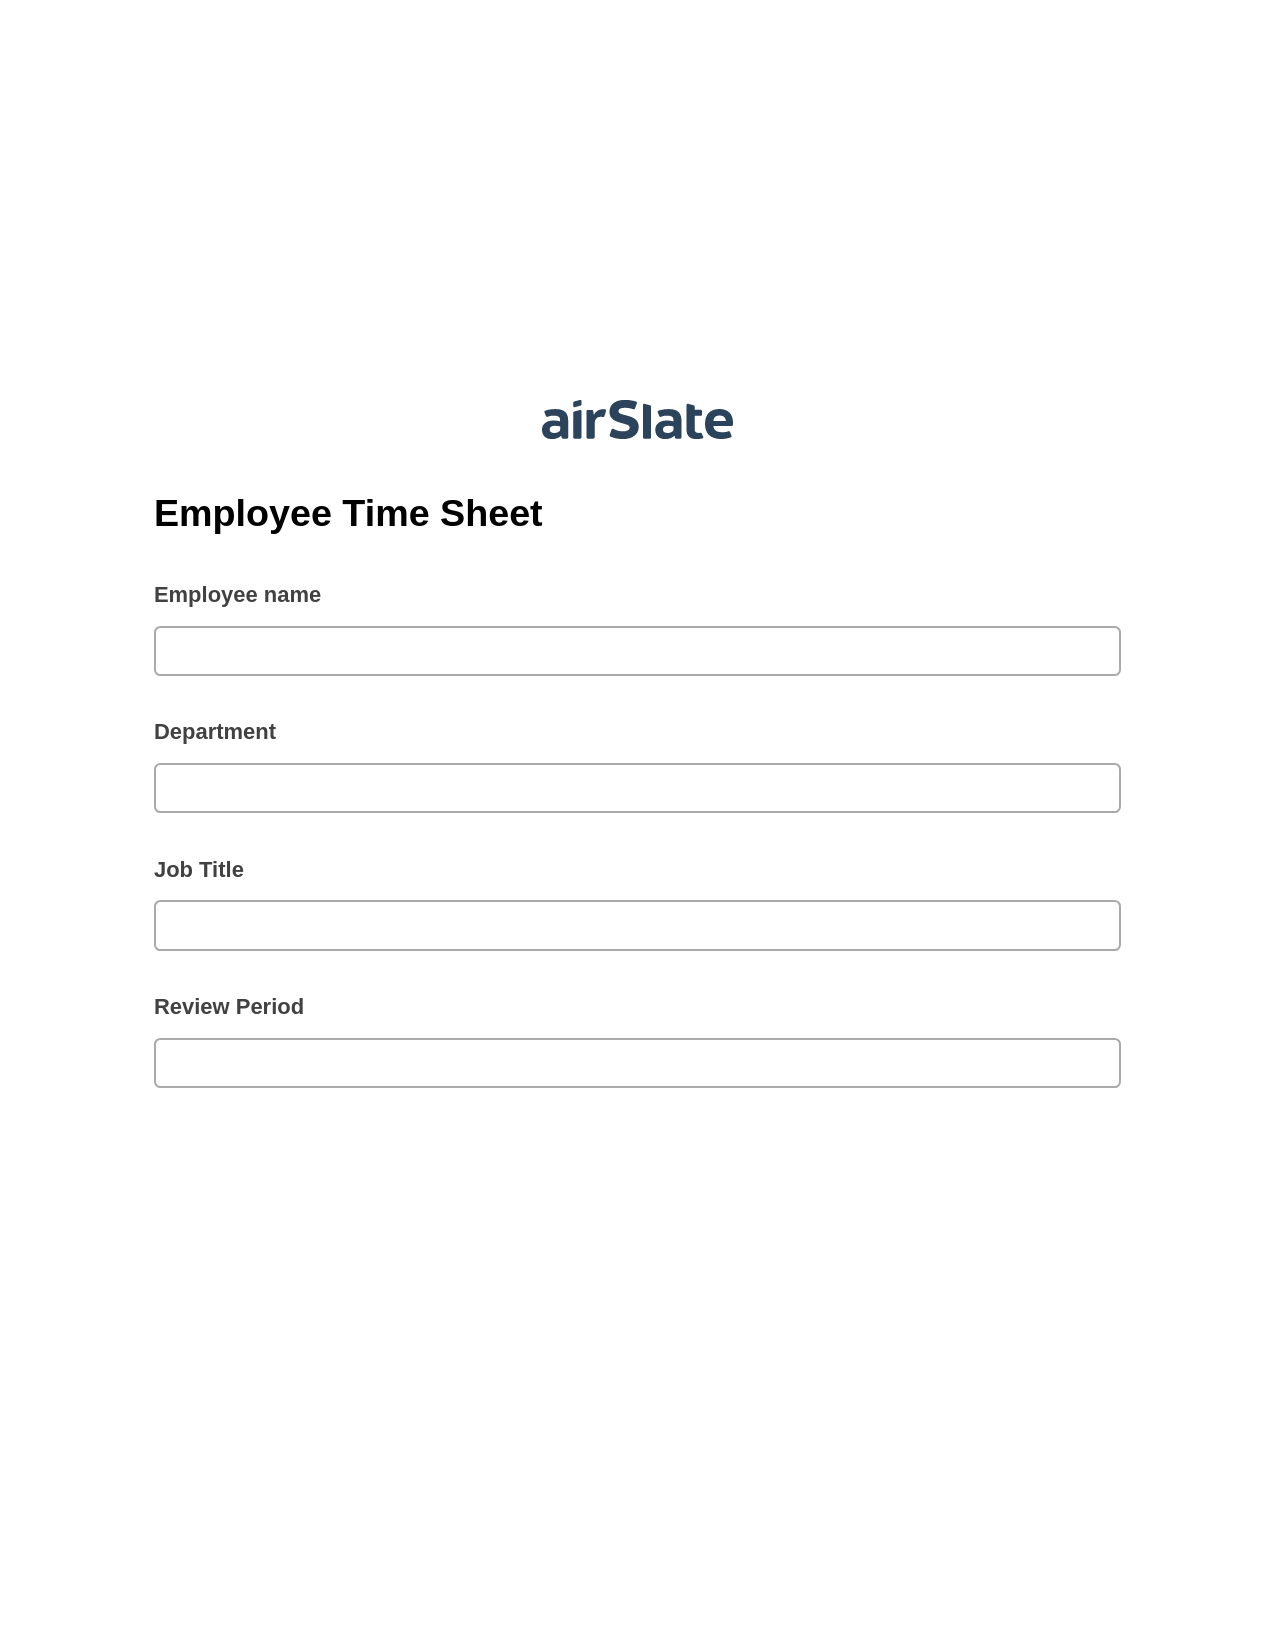 Employee Time Sheet Pre-fill from CSV File Bot, Update Audit Trail Bot, Archive to Dropbox Bot